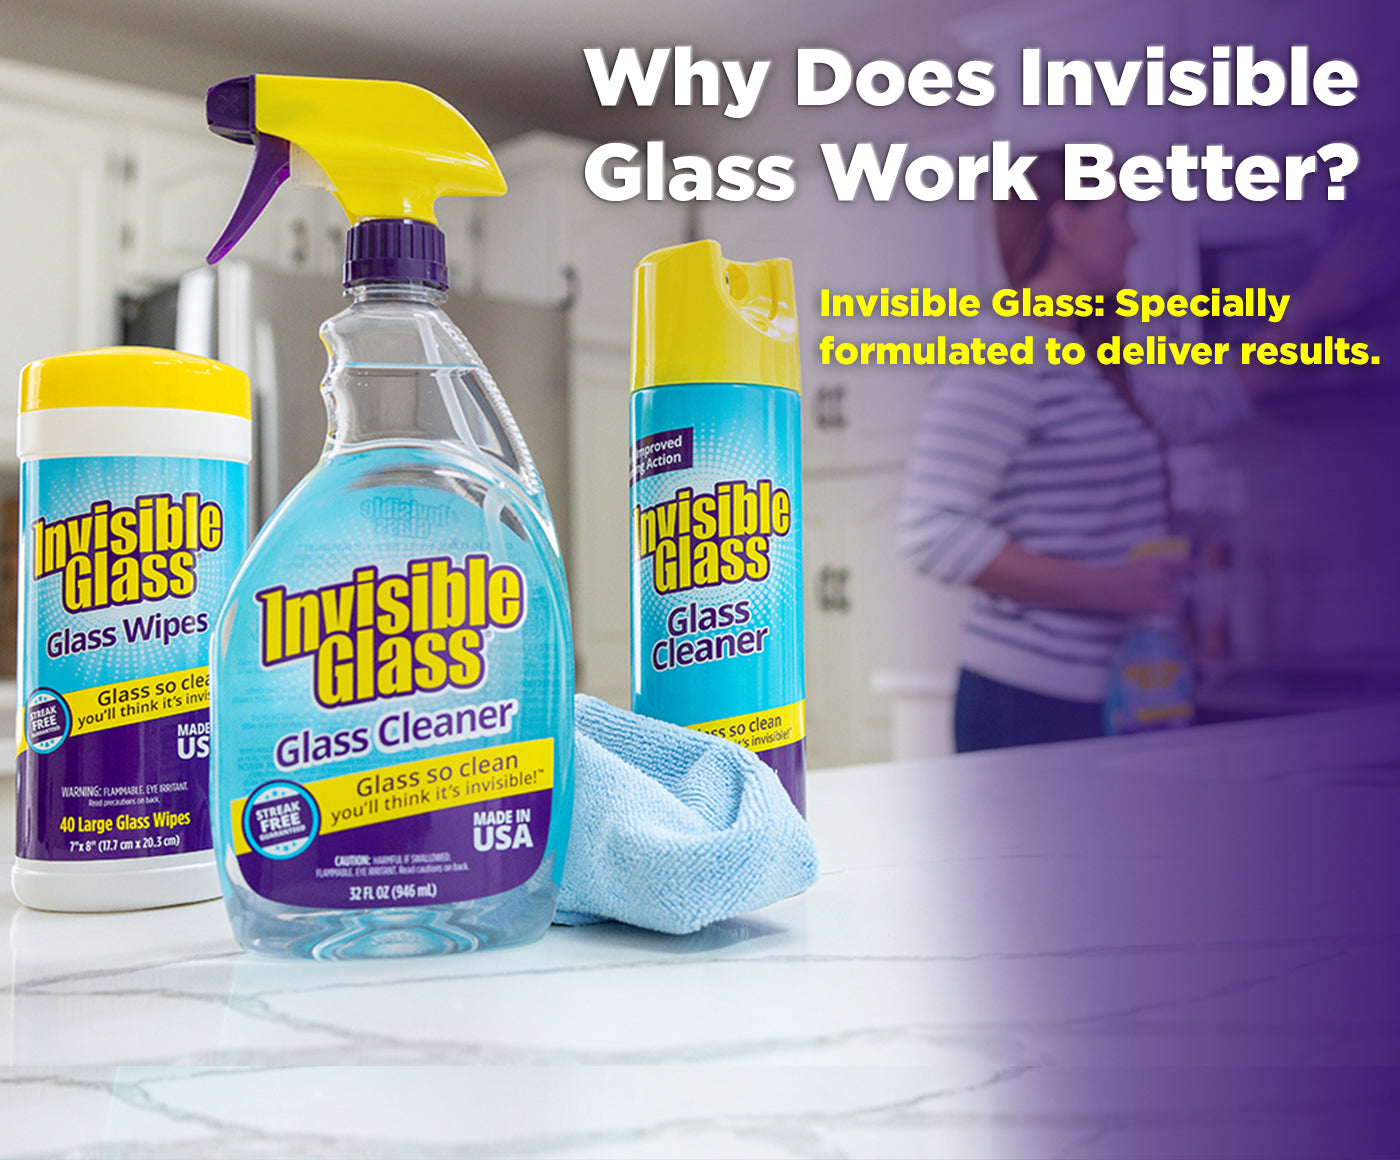 Invisible Glass - Stoner Invisible Glass Cleaner & Spray